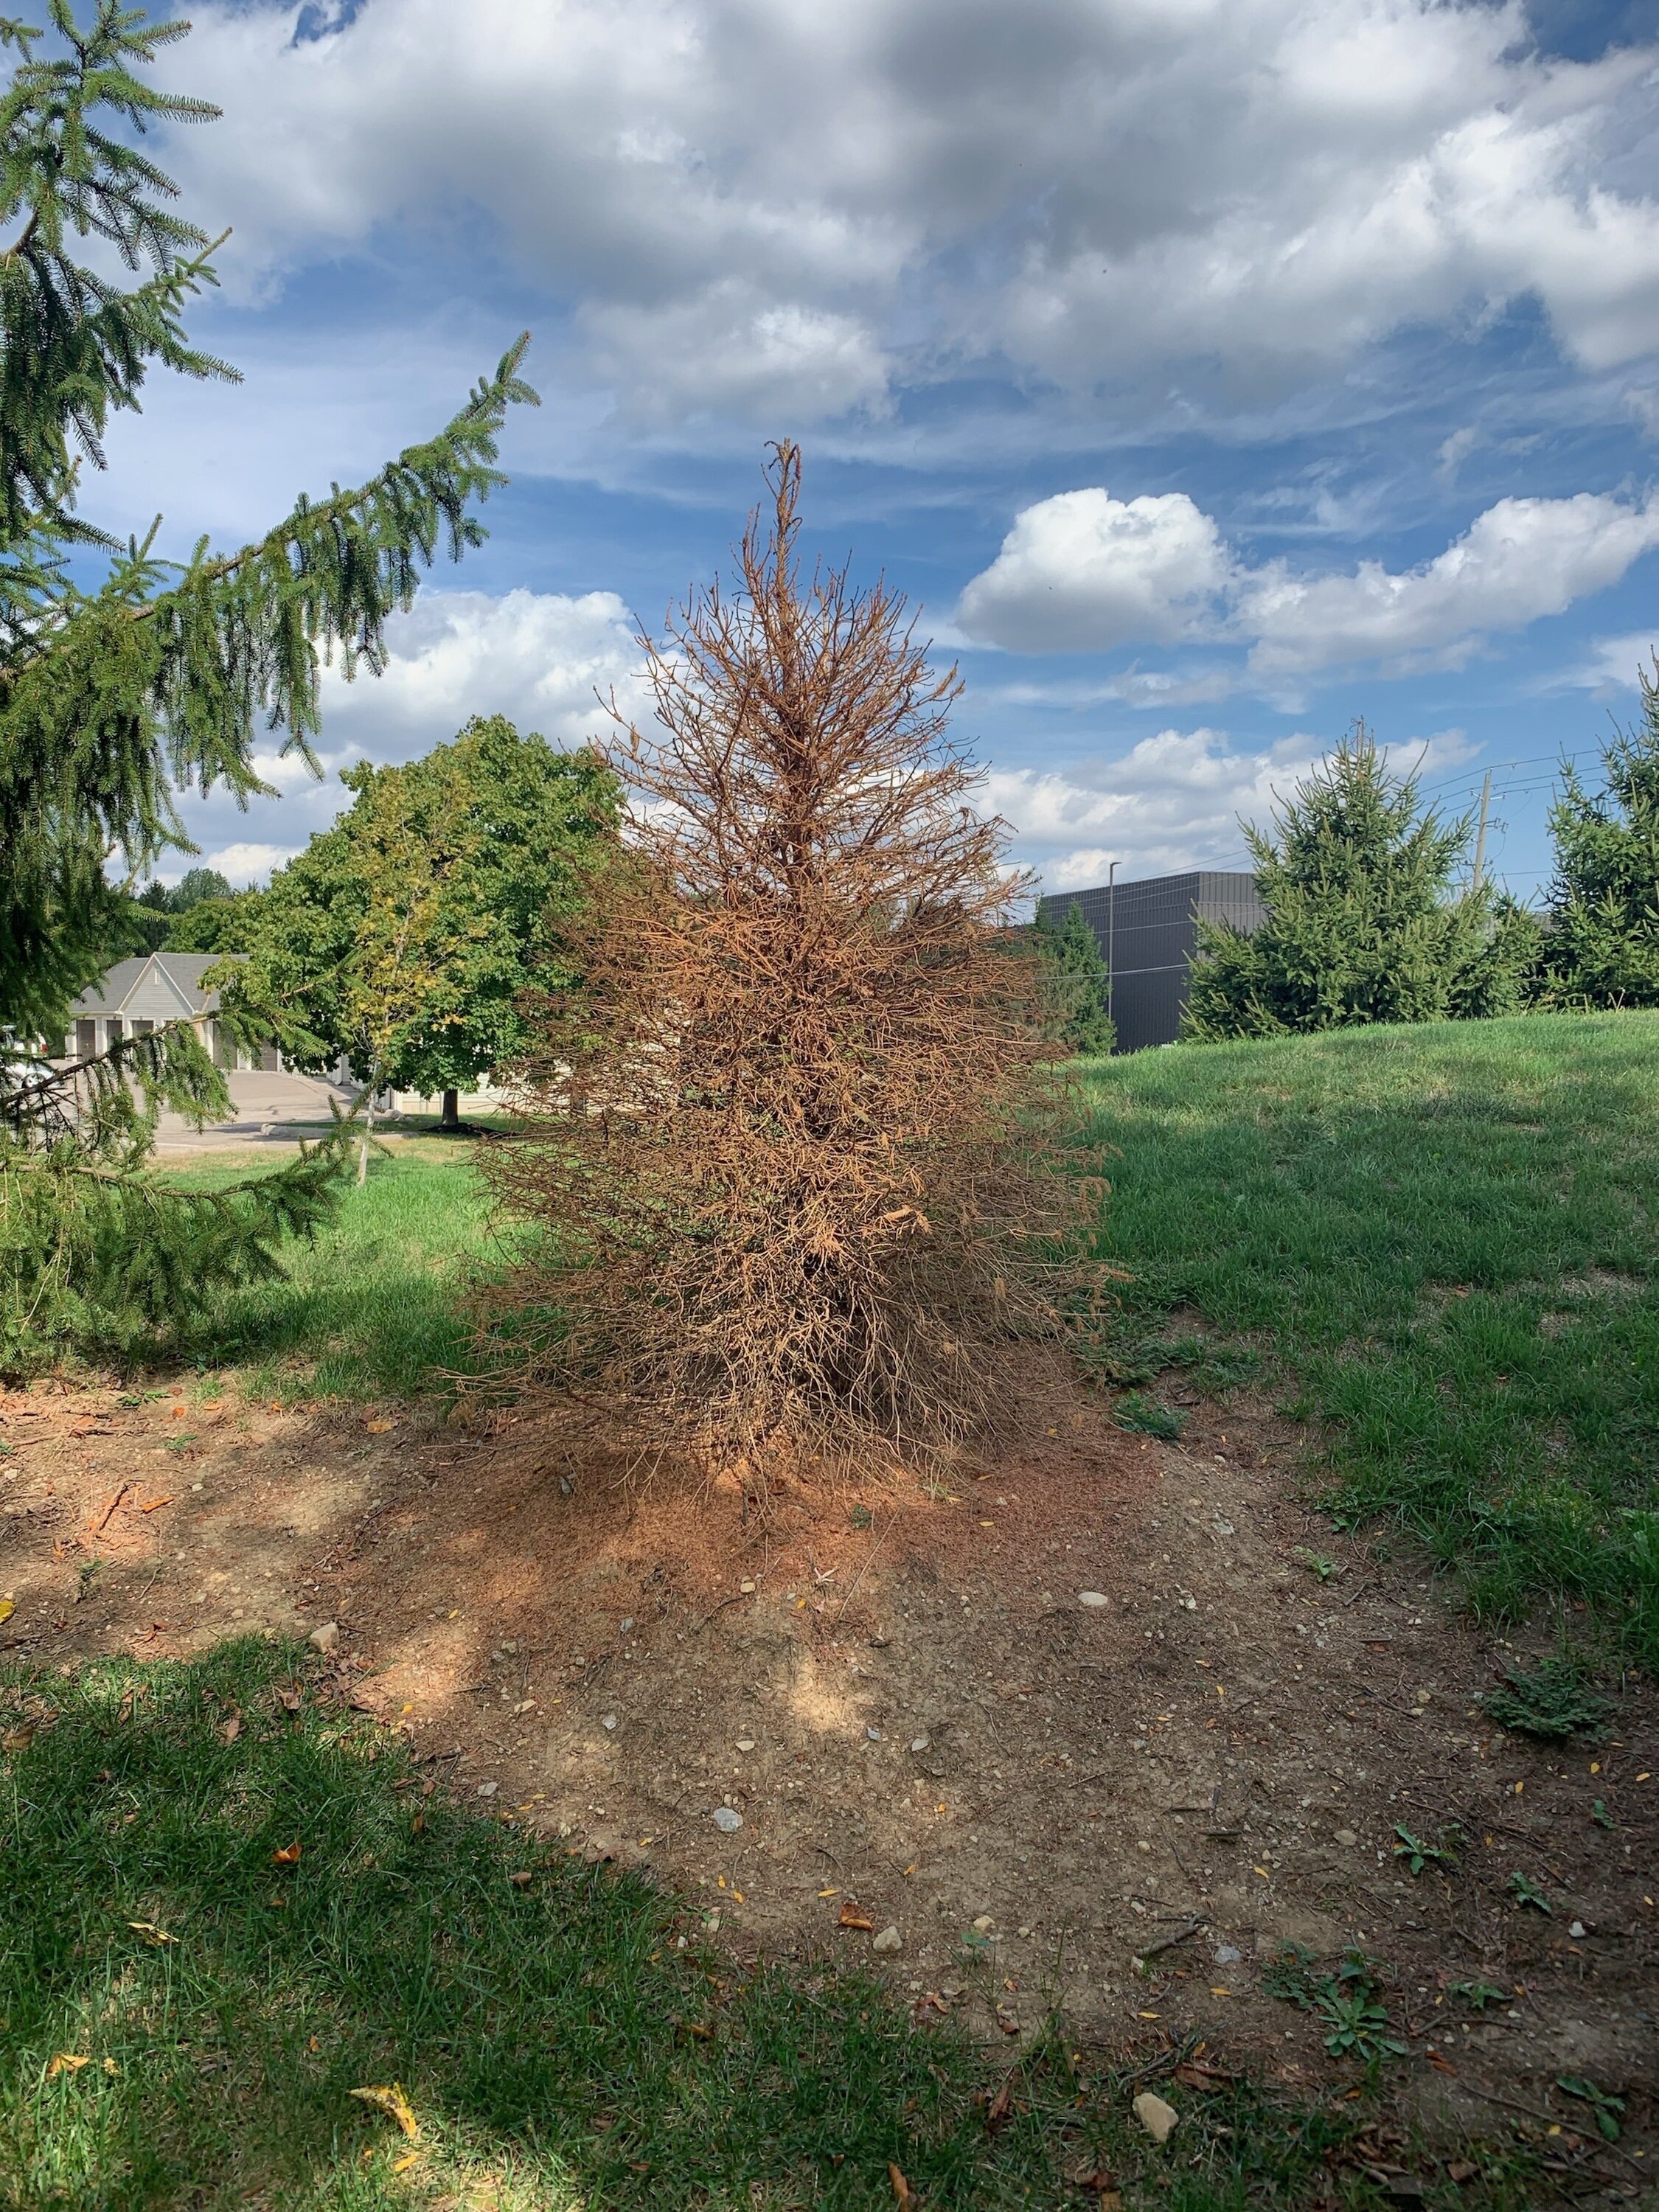 Dead Spruce, planted in June just prior to rain shutting off